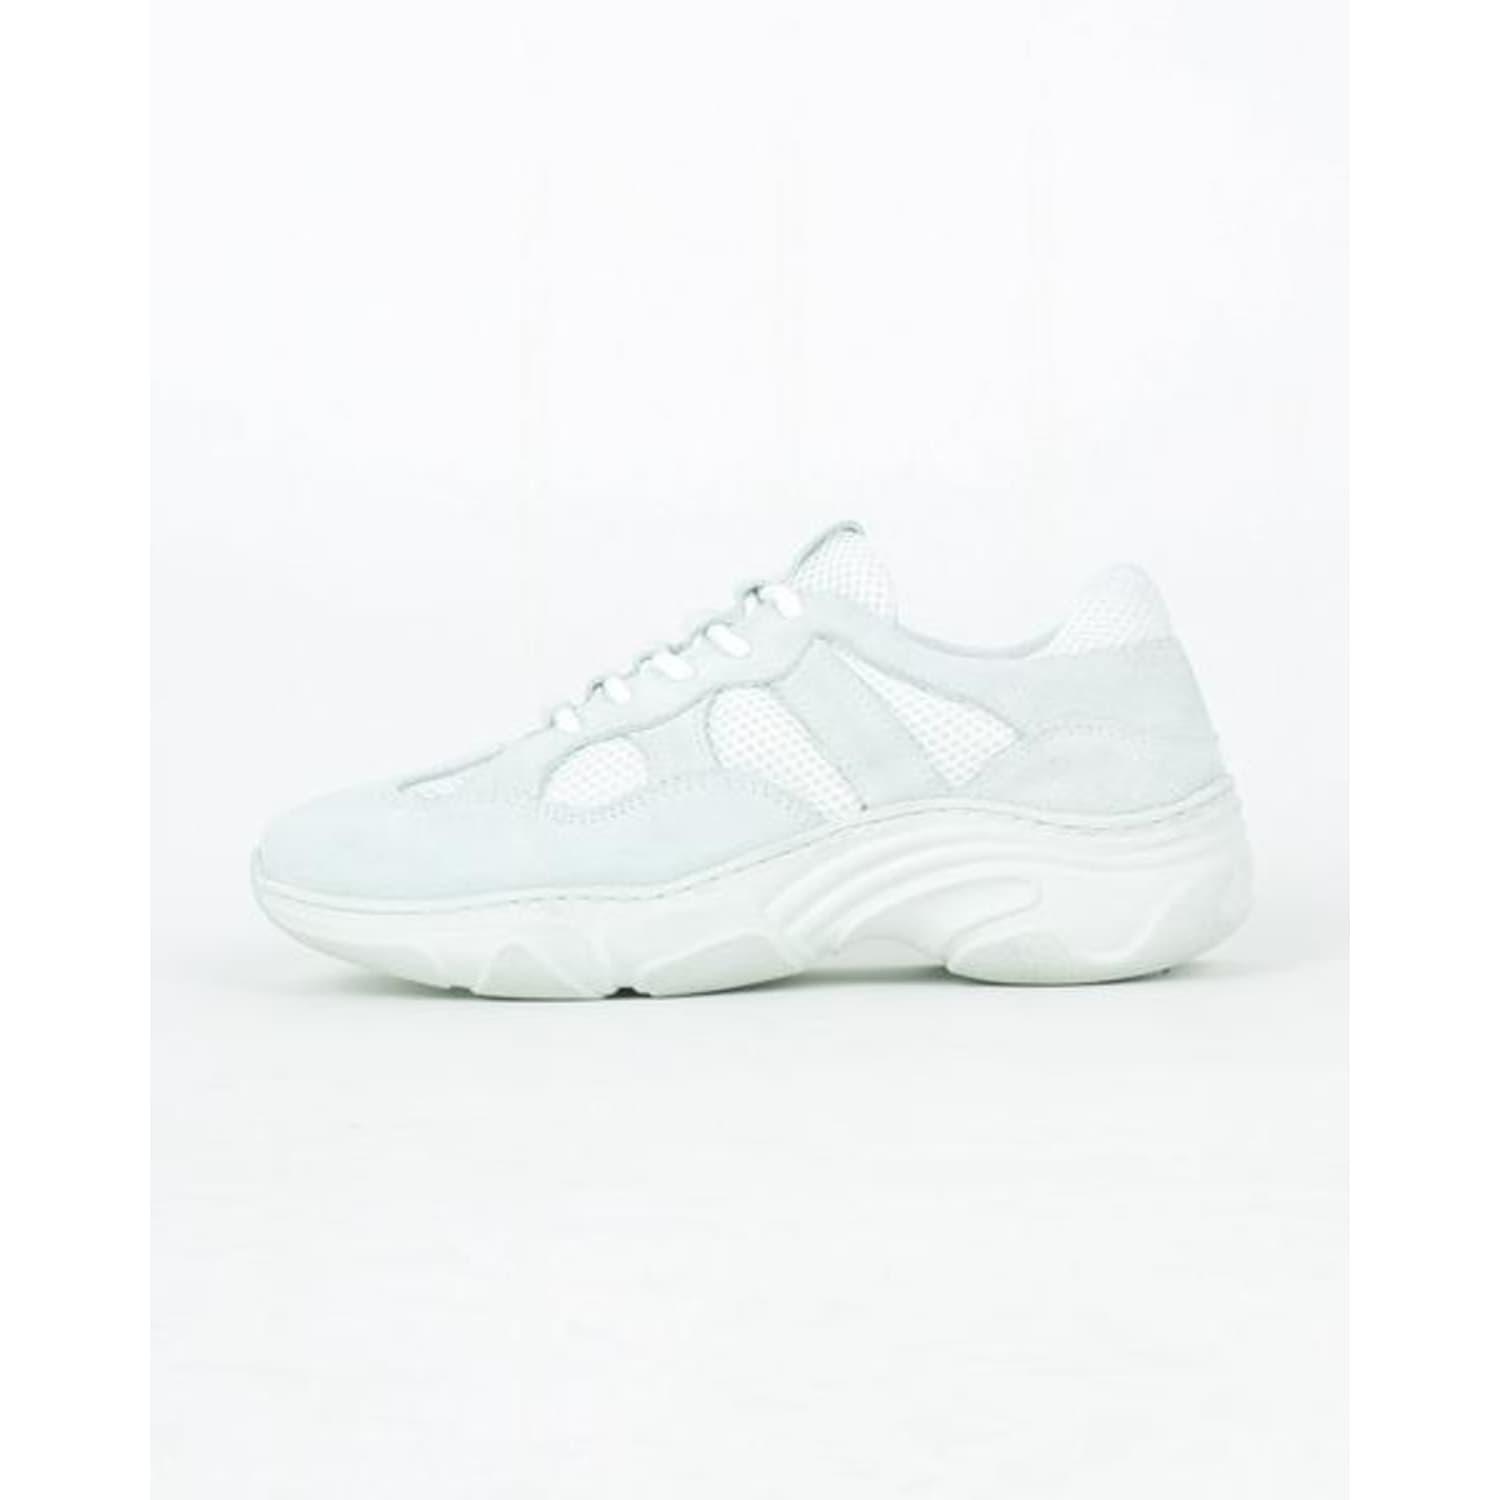 Garment Project Front Sneaker White Textile Suede | Lyst